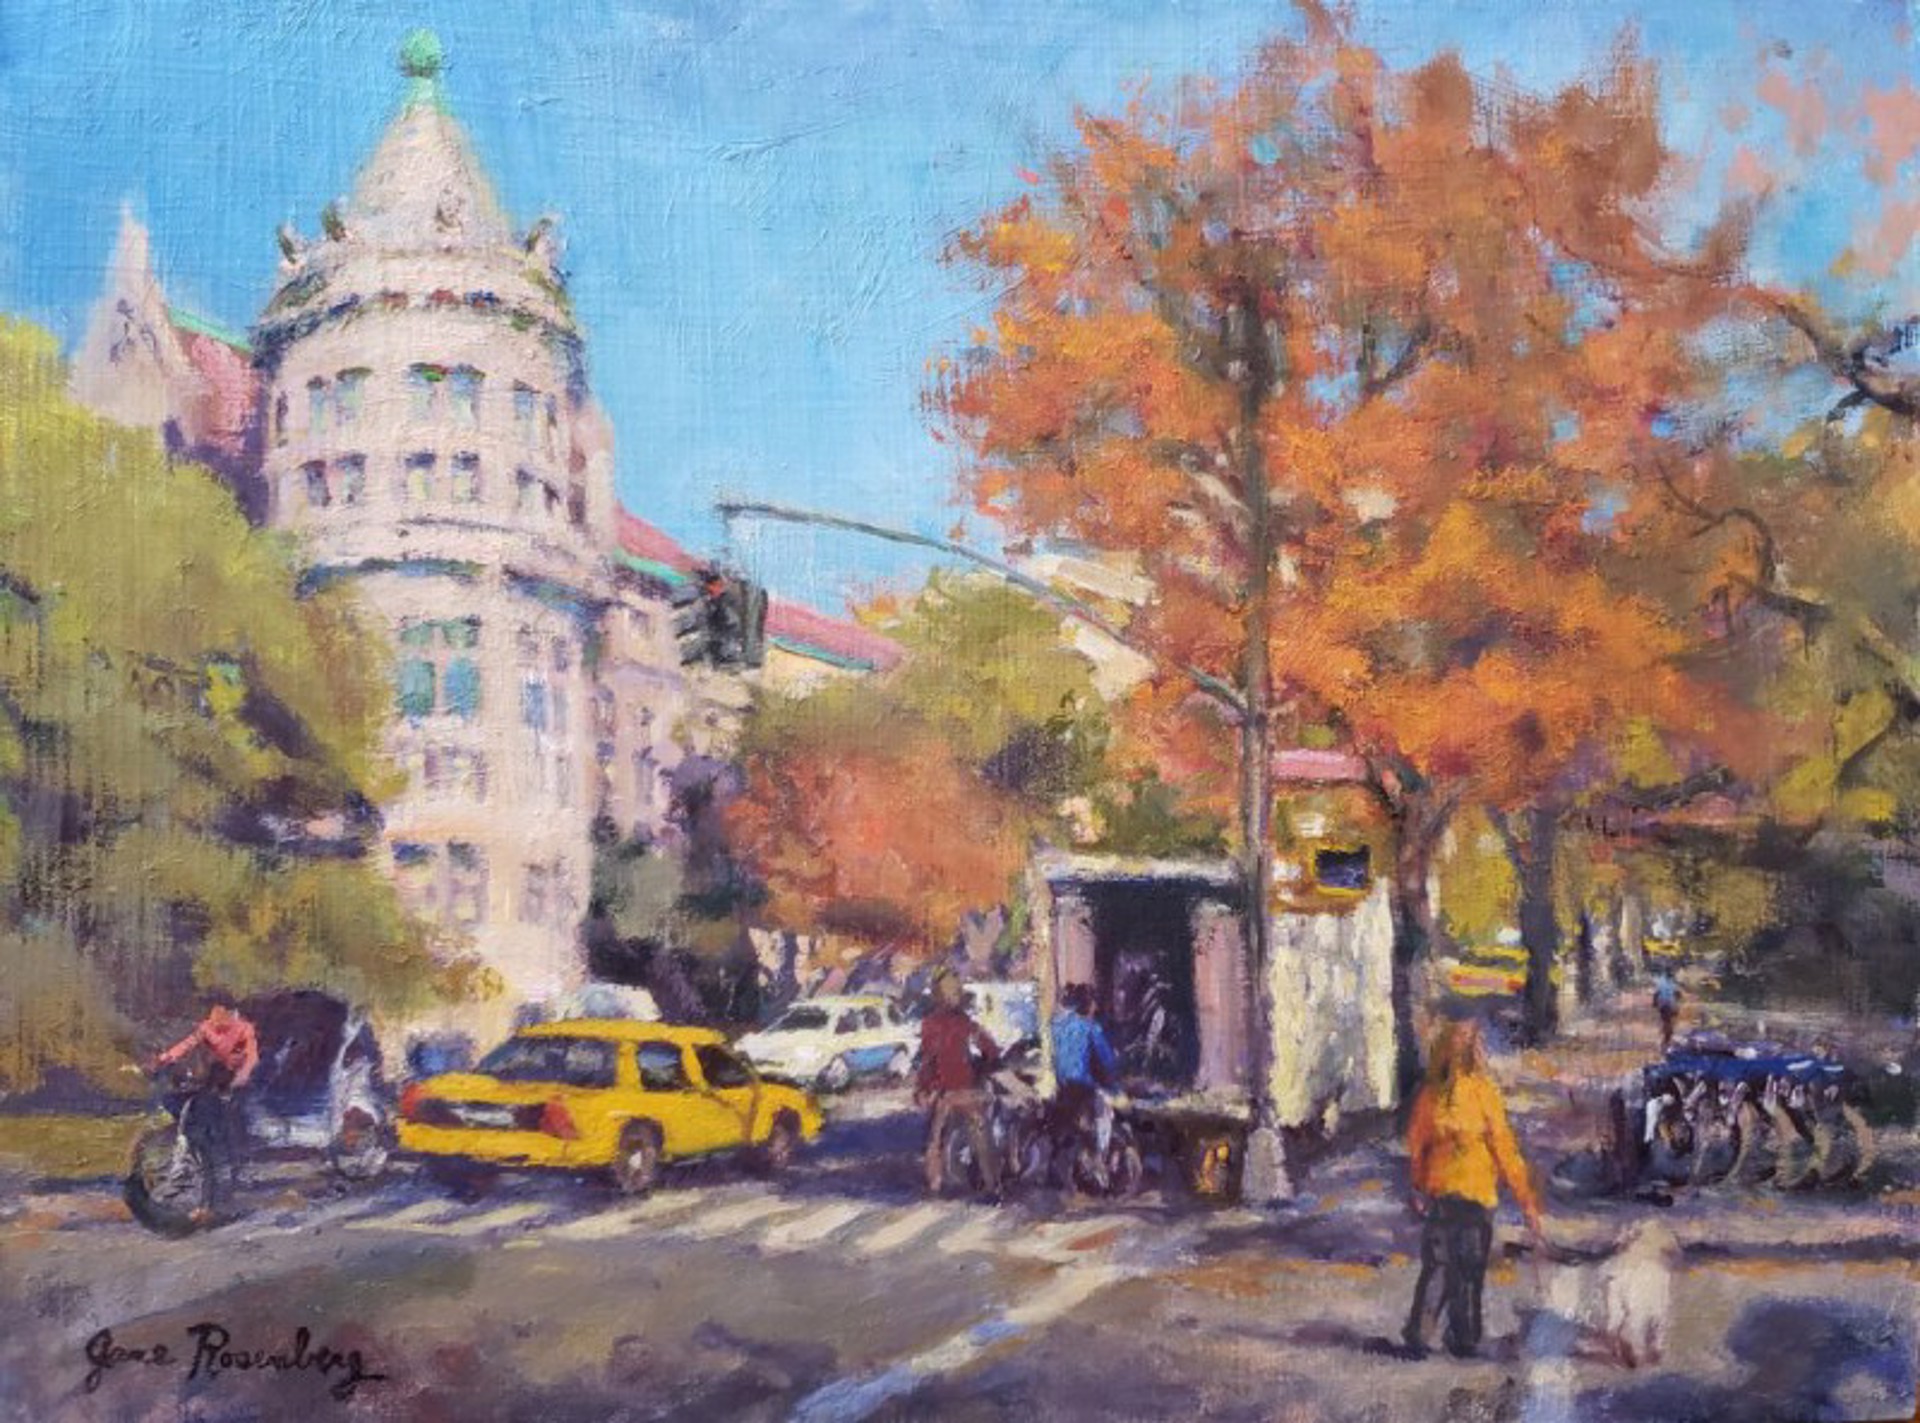 Central Park West at West 77th St., Autumn by Jane Rosenberg